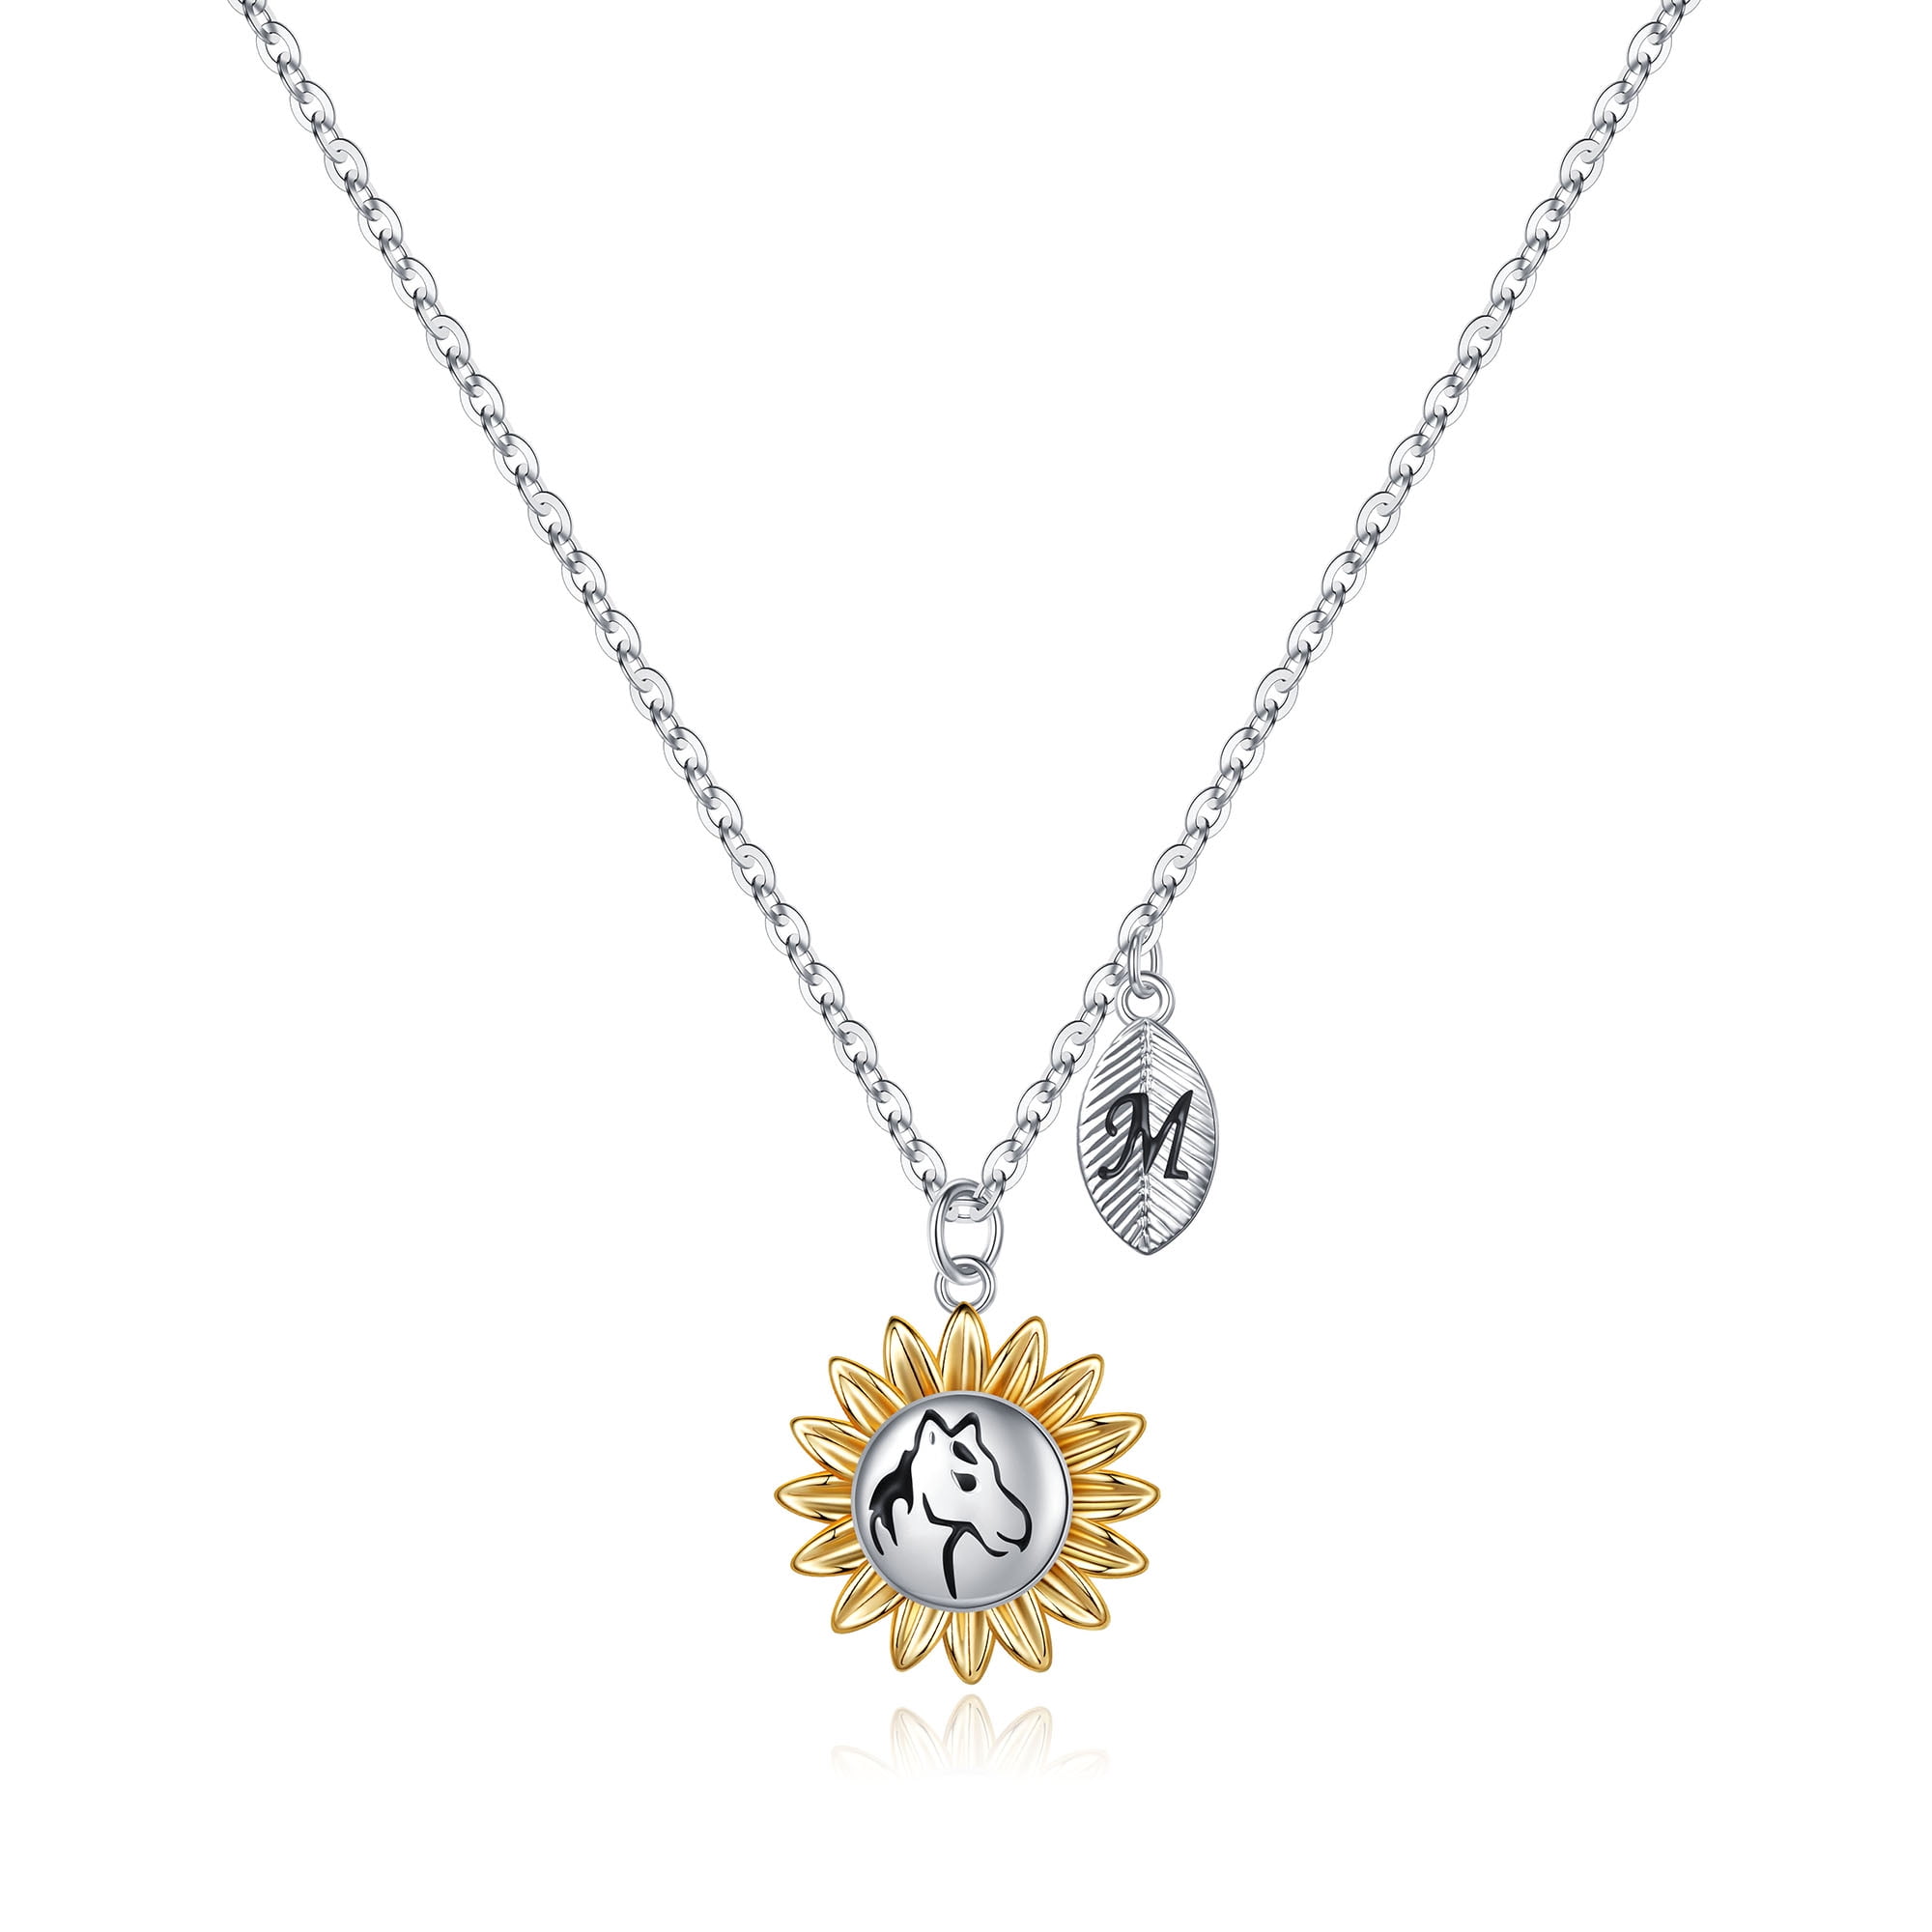 Sunflower Necklace Sterling Silver Van Gogh with Gift Pouch 